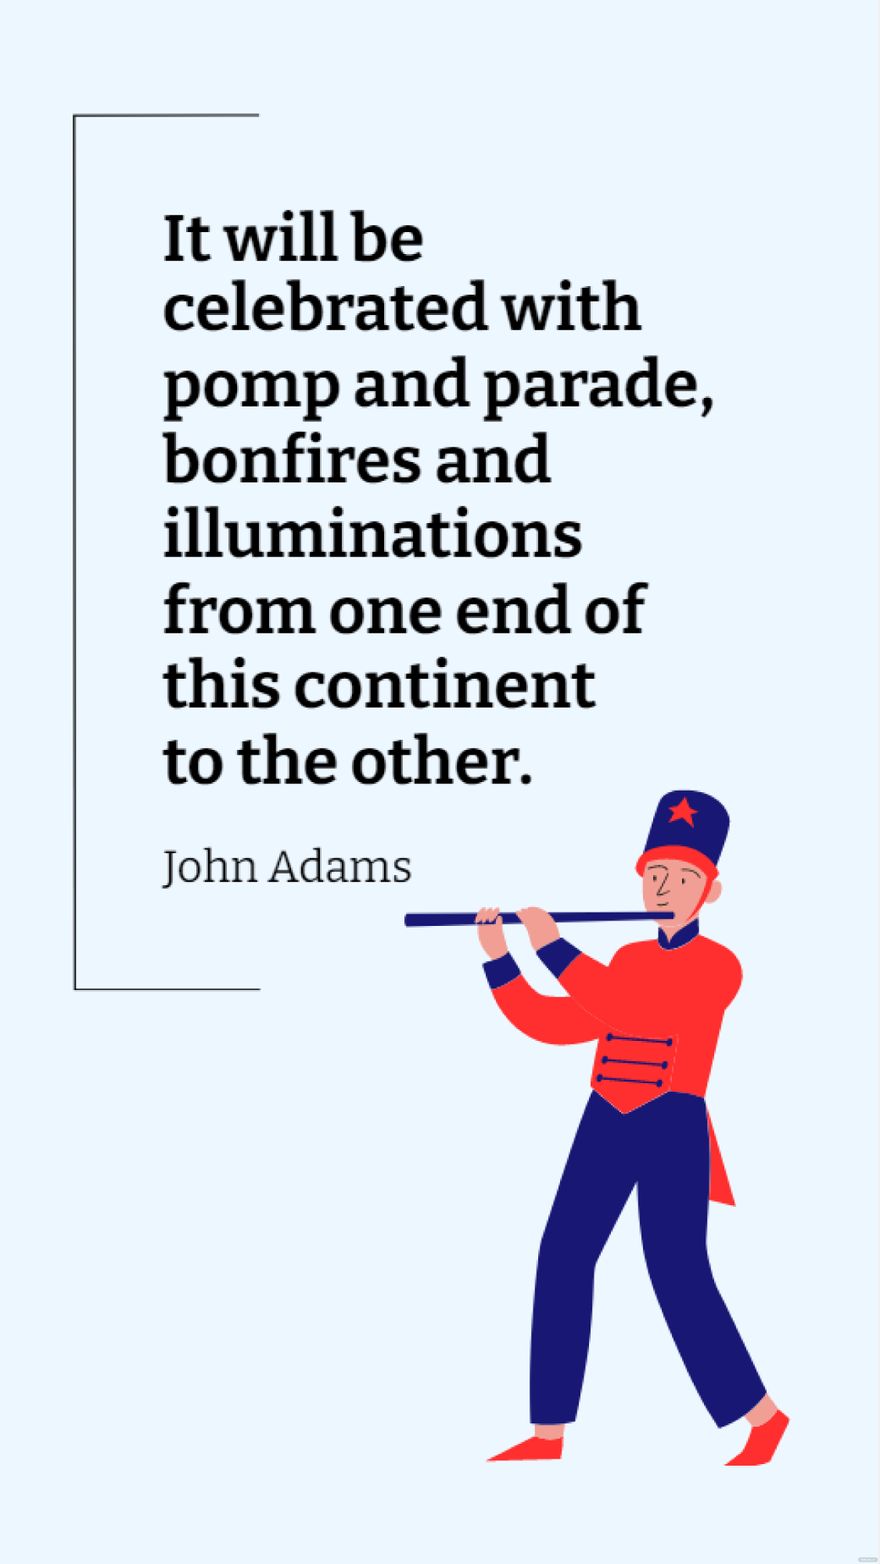 John Adams - It will be celebrated with pomp and parade, bonfires and illuminations from one end of this continent to the other.